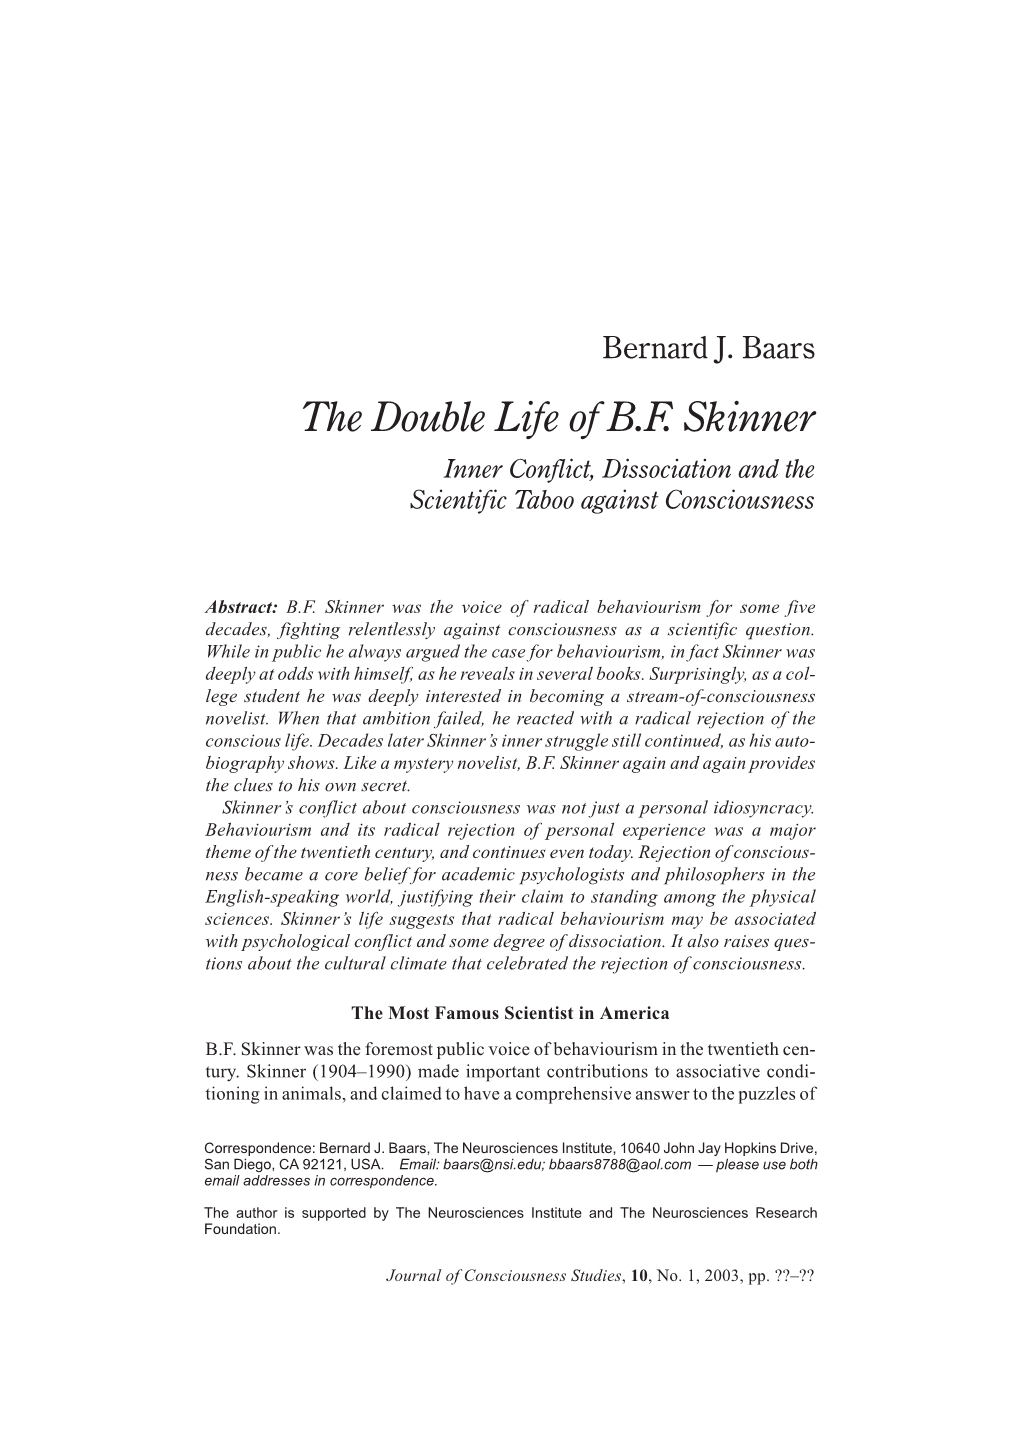 The Double Life of B.F. Skinner Inner Conflict, Dissociation and the Scientific Taboo Against Consciousness